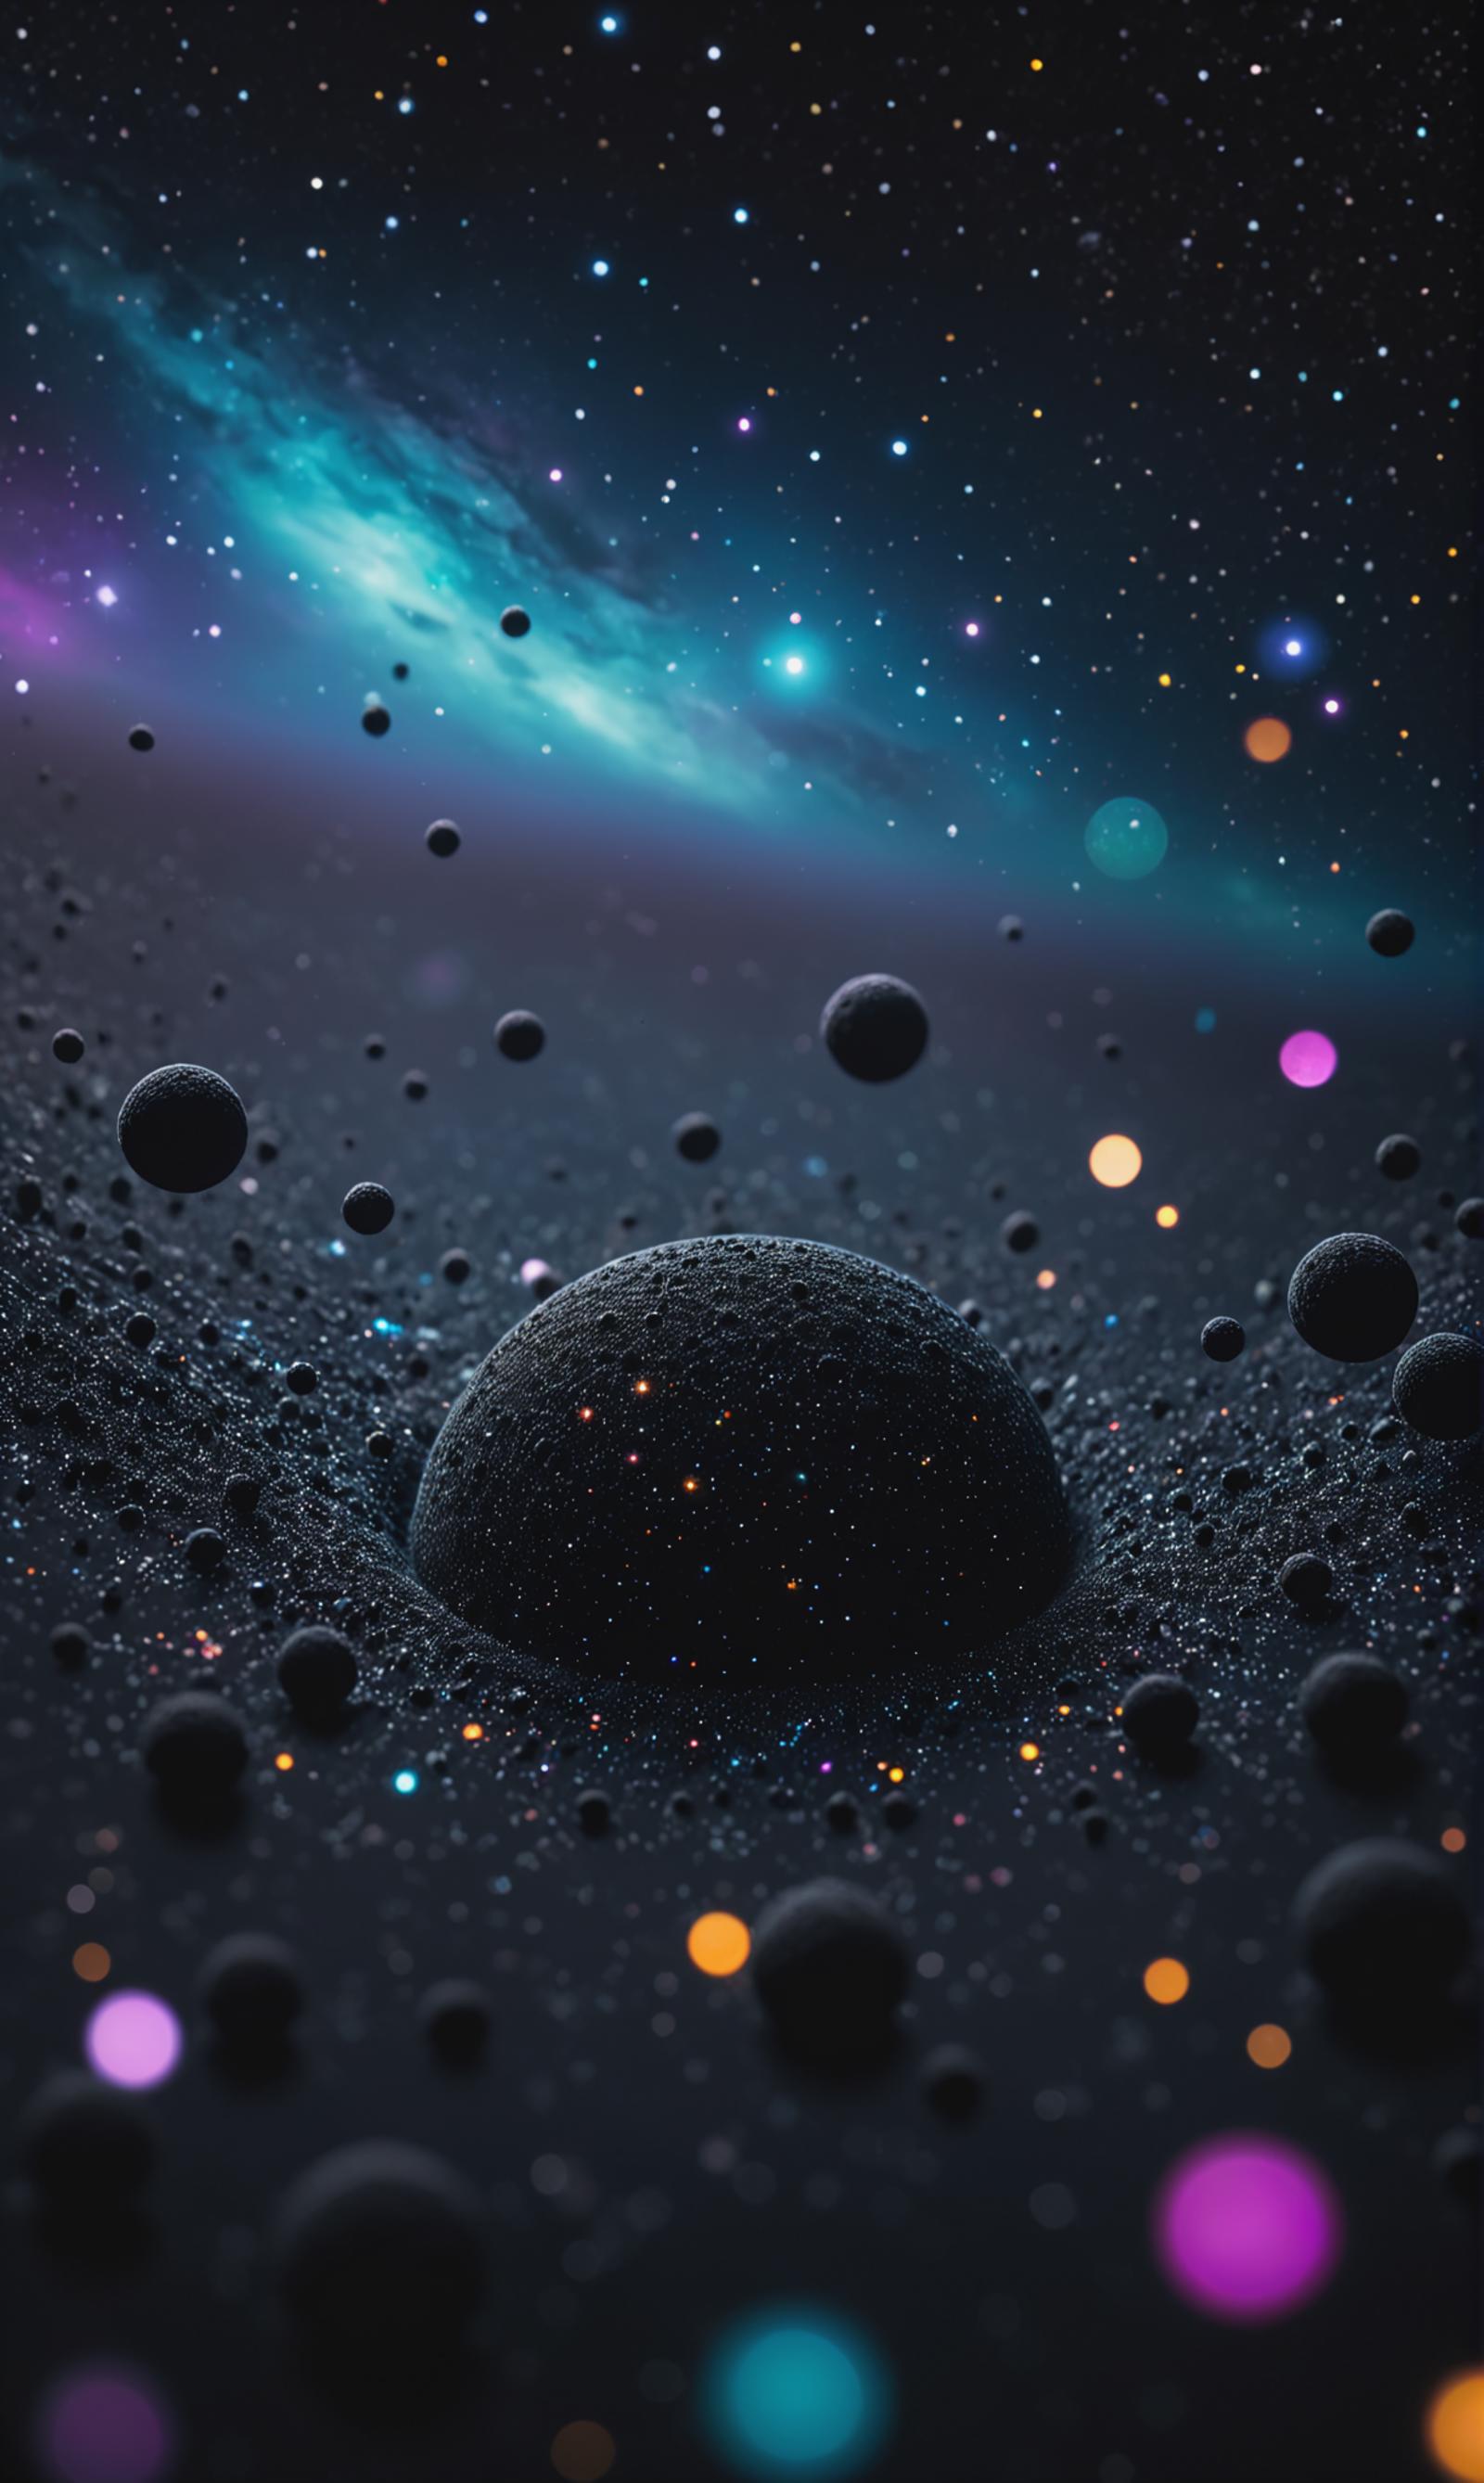 A Space Scene with a Large Planet and Various Black and White Spheres